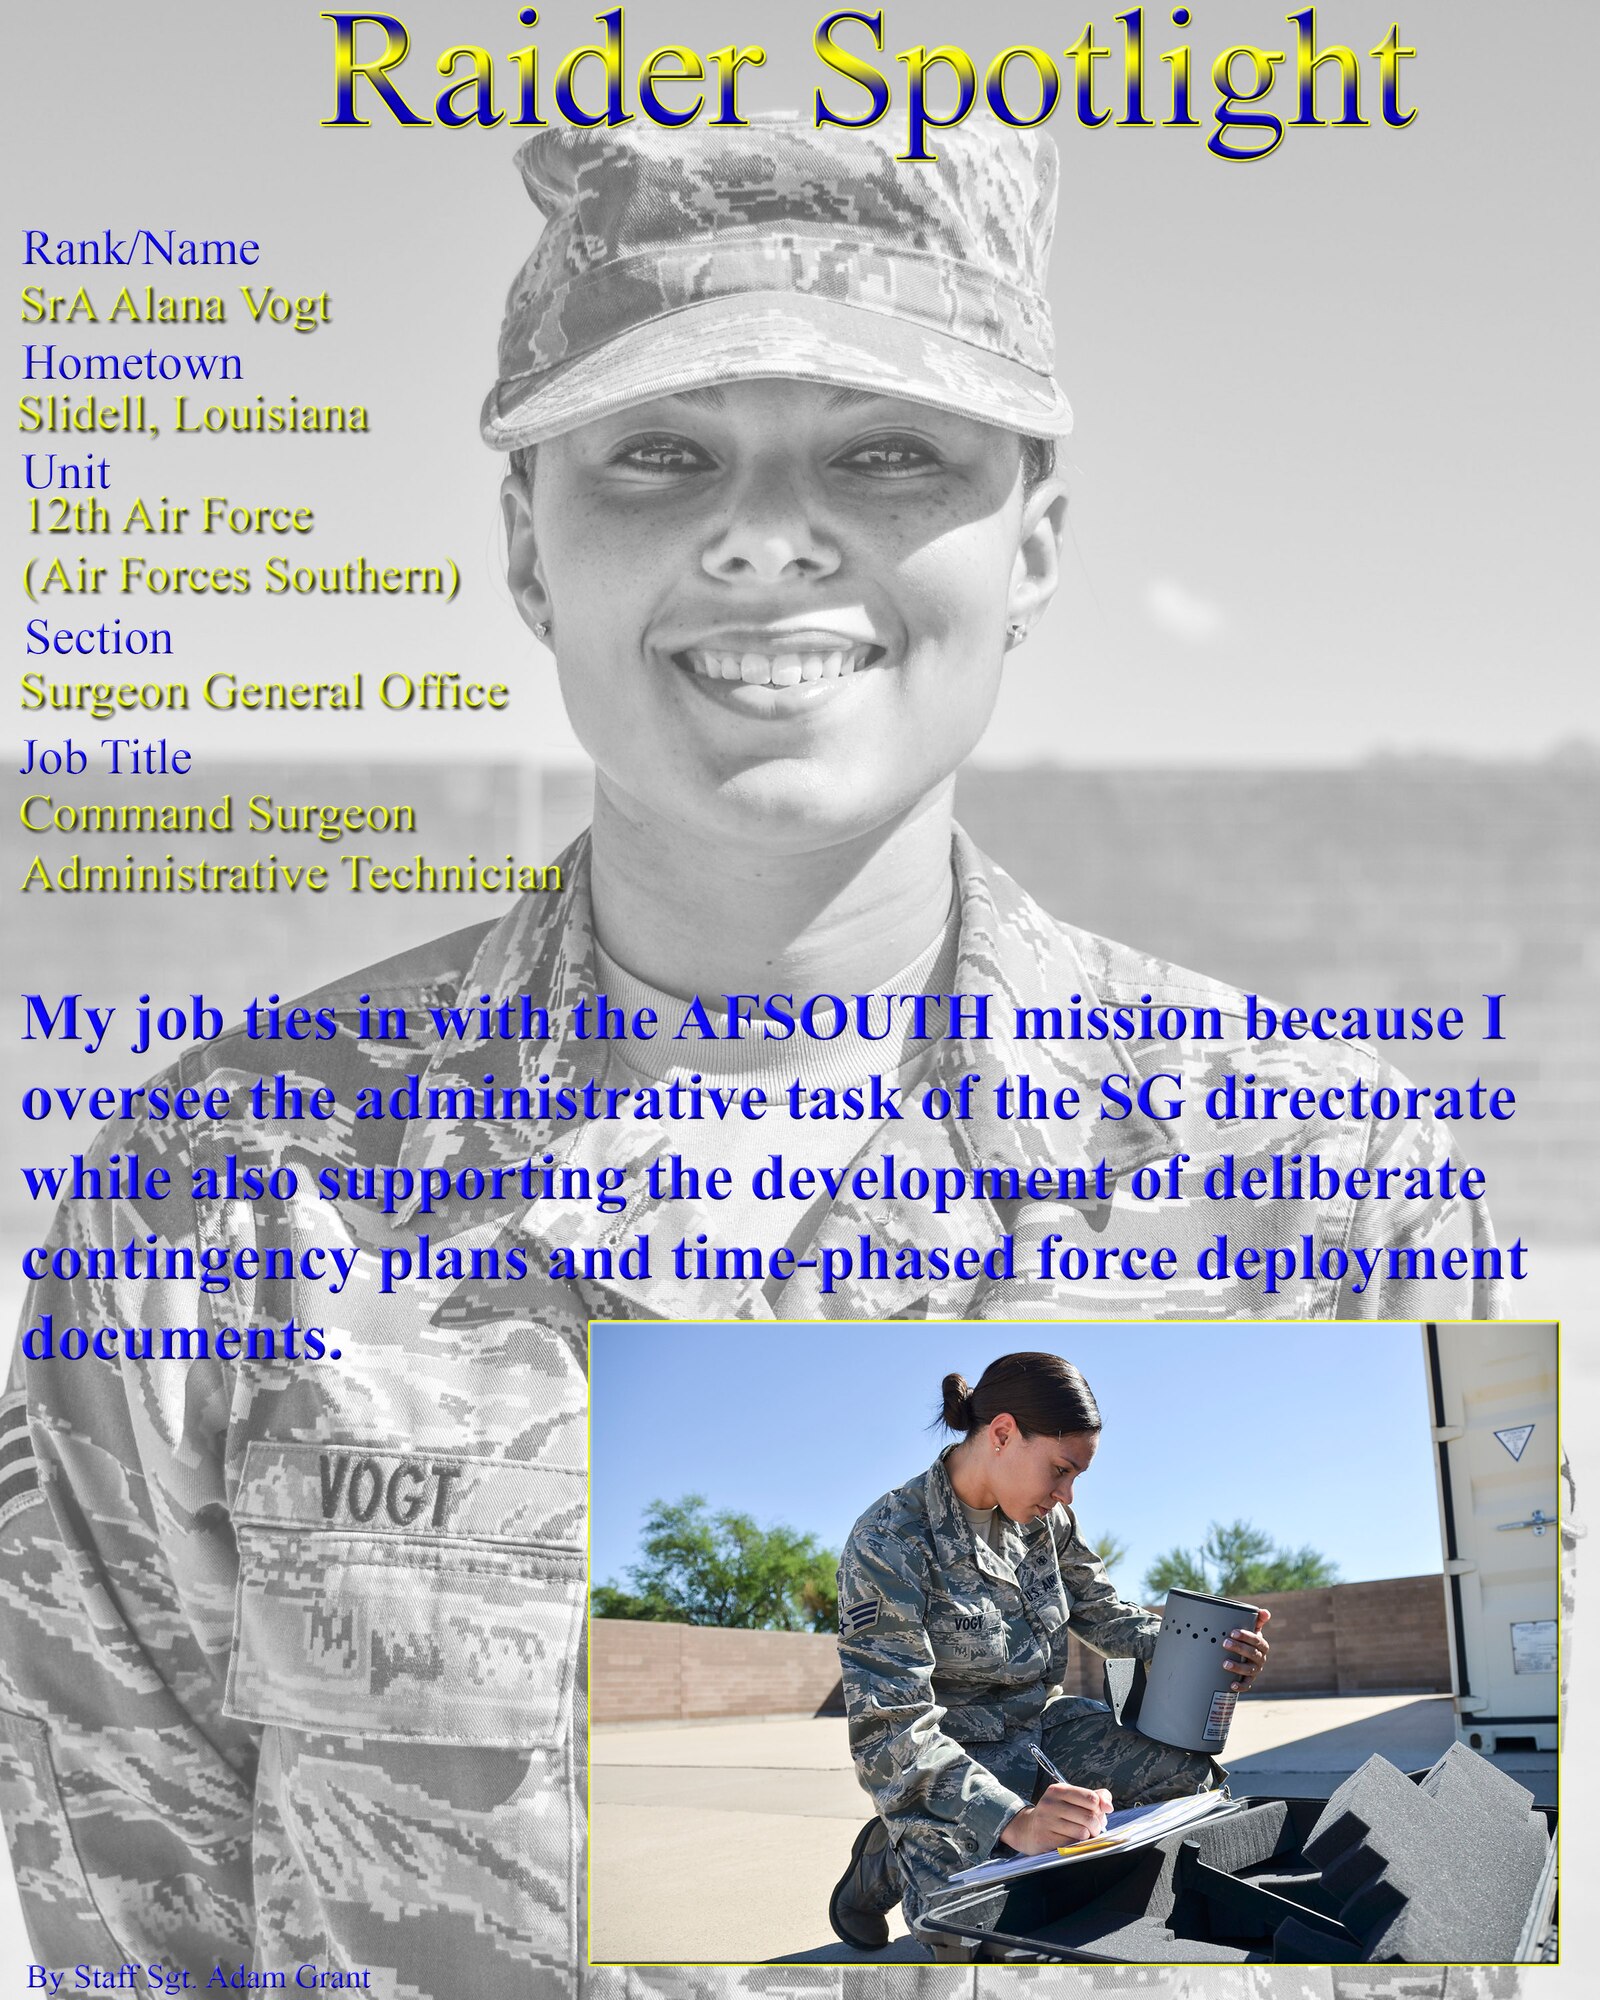 How does your job tie in with the AFSOUTH mission?  